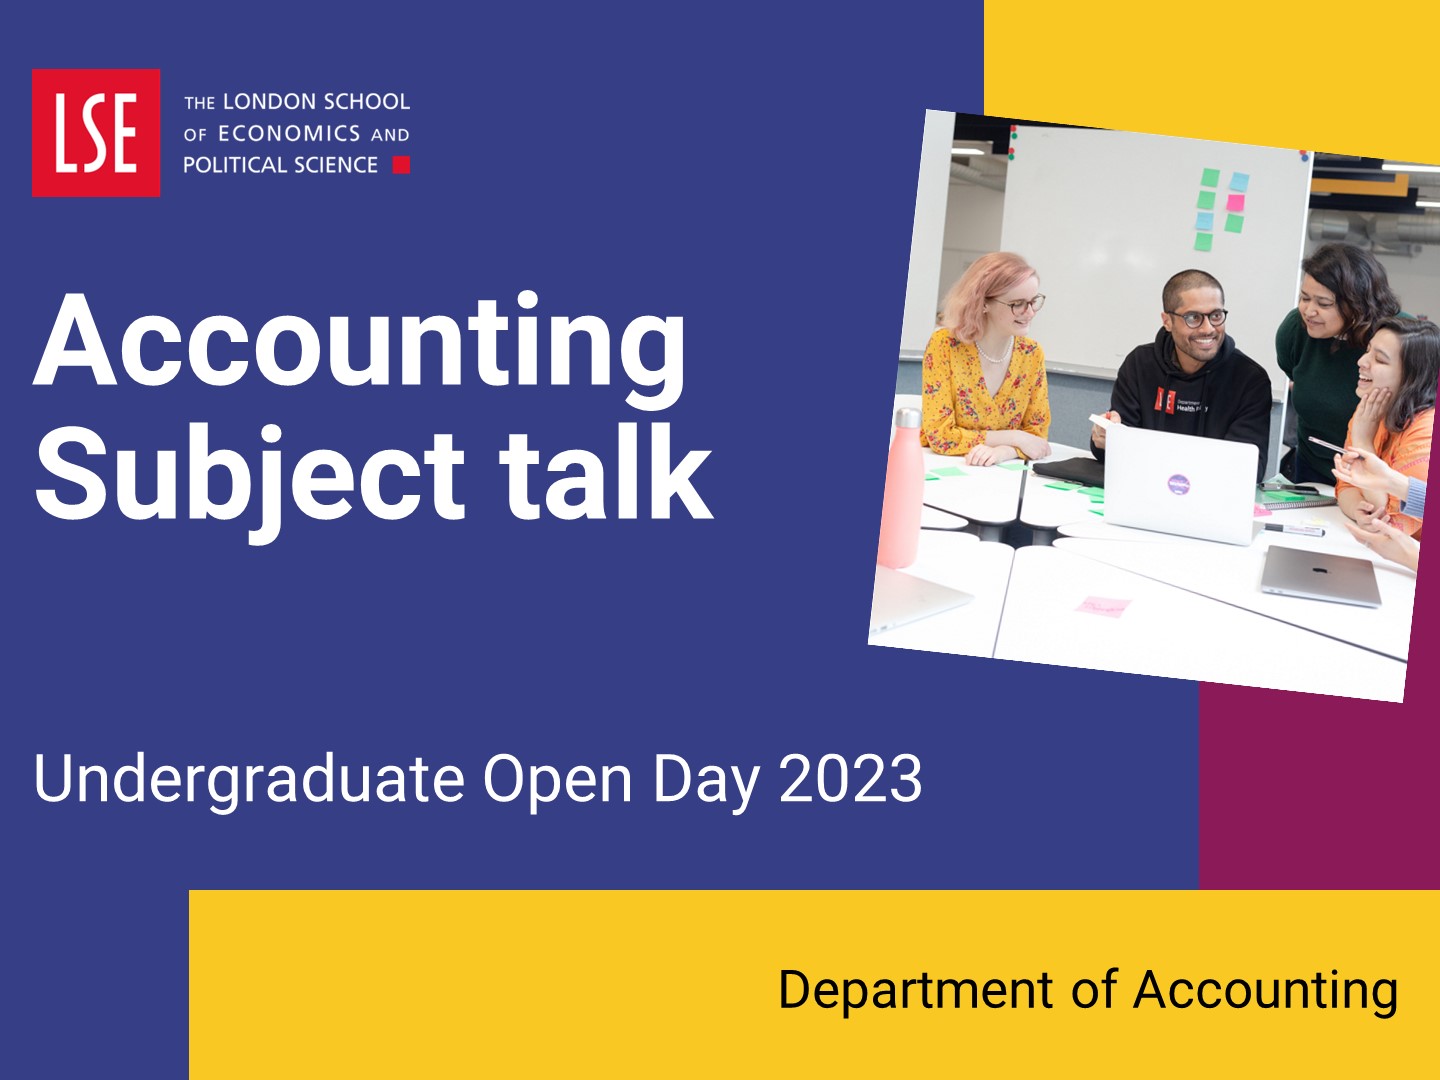 Virtual Open Day 2023 - Accounting